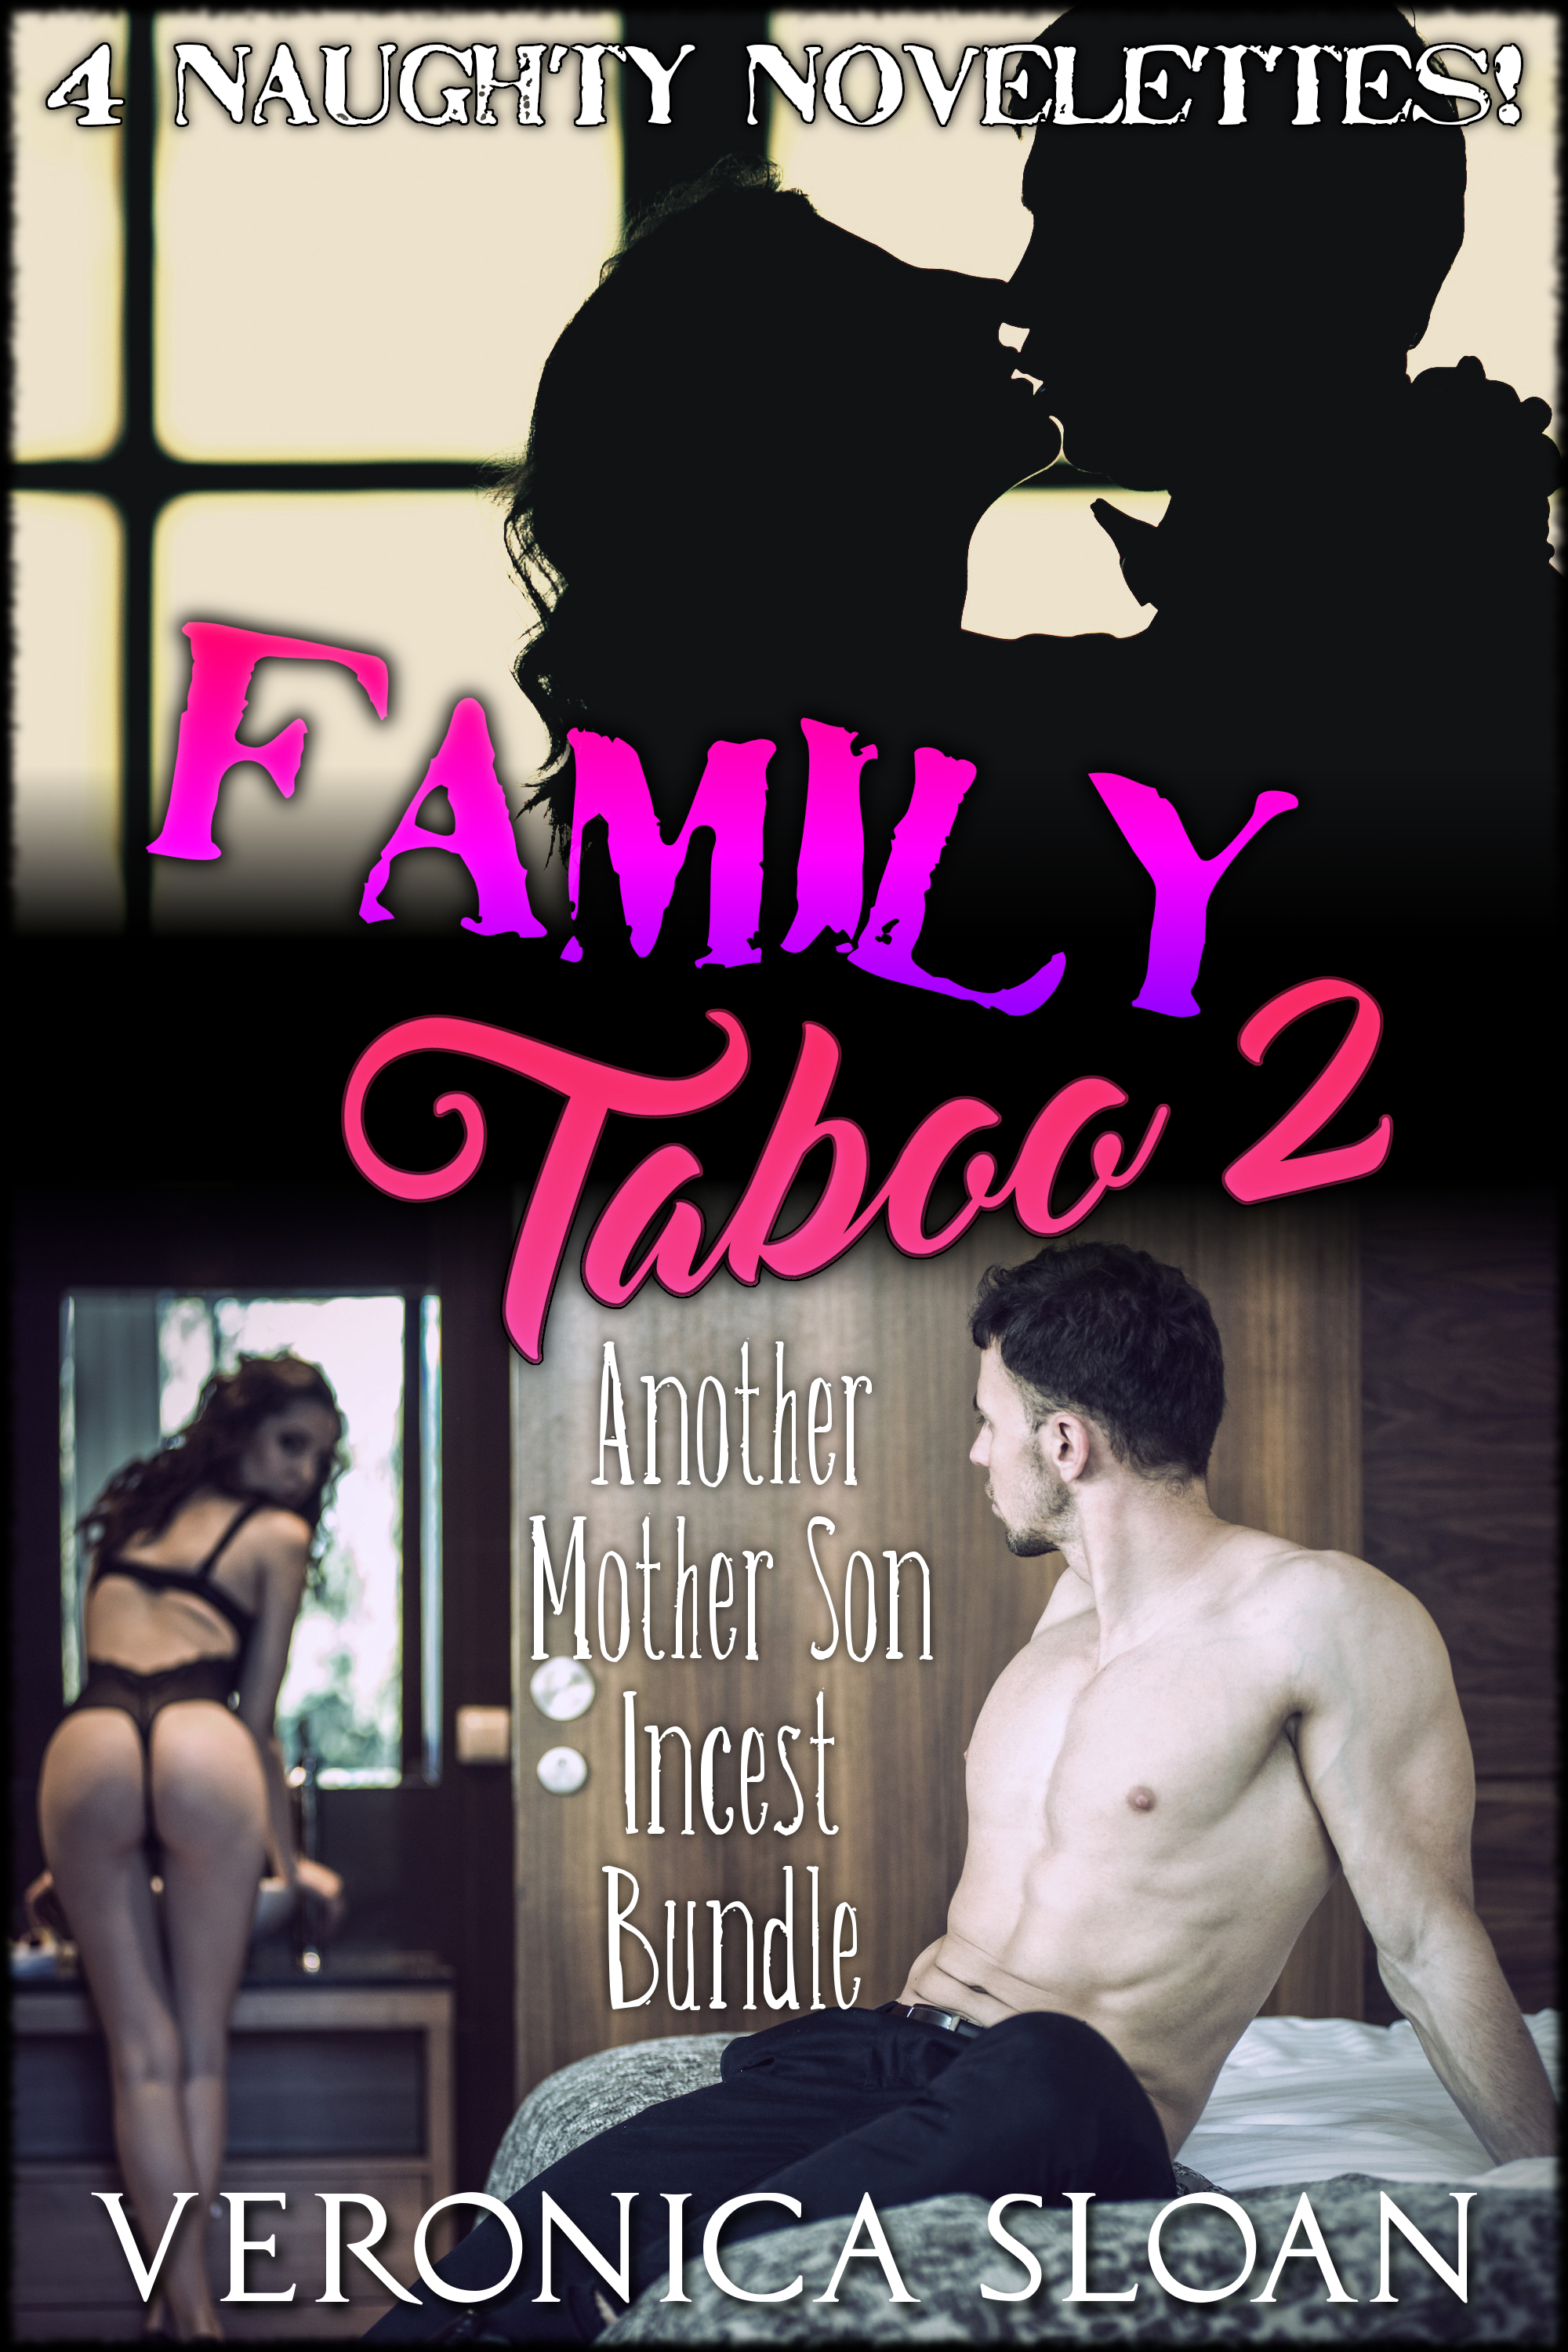 don mullinax recommends mother and son taboo pic